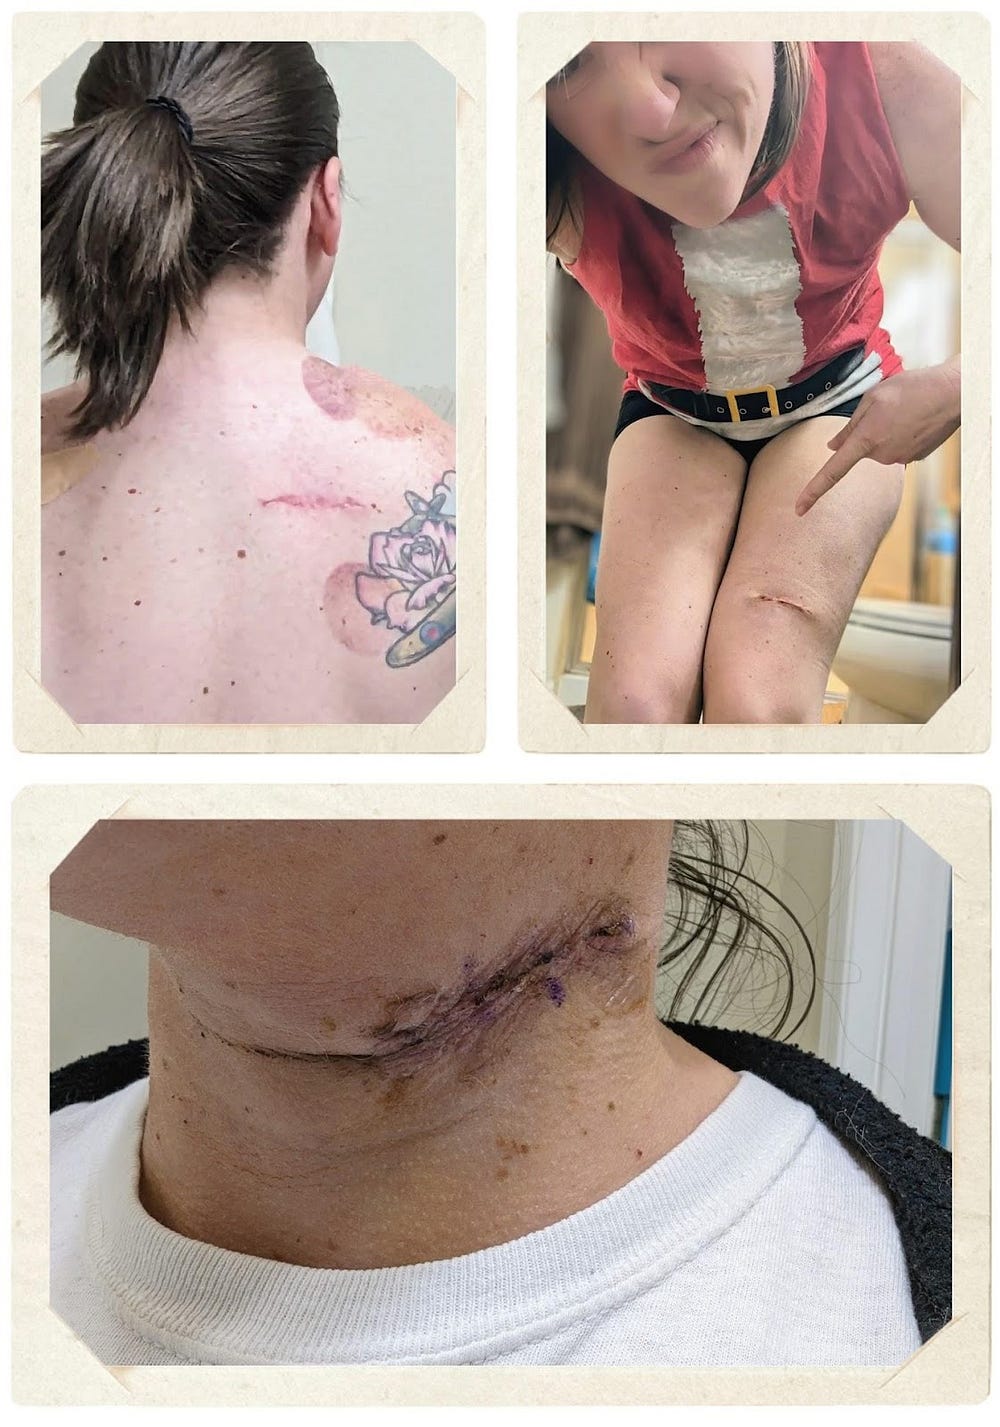 Post surgery images of Heather Gioia, author. In the upper left is the scar from the Stage 0 surgery on her upper left shoulder. The upper right is a picture of the scar from the Stage 0 surgery on her left thigh. At the bottom is a picture of the scar on the left side of her neck from the Stage 1 surgery.